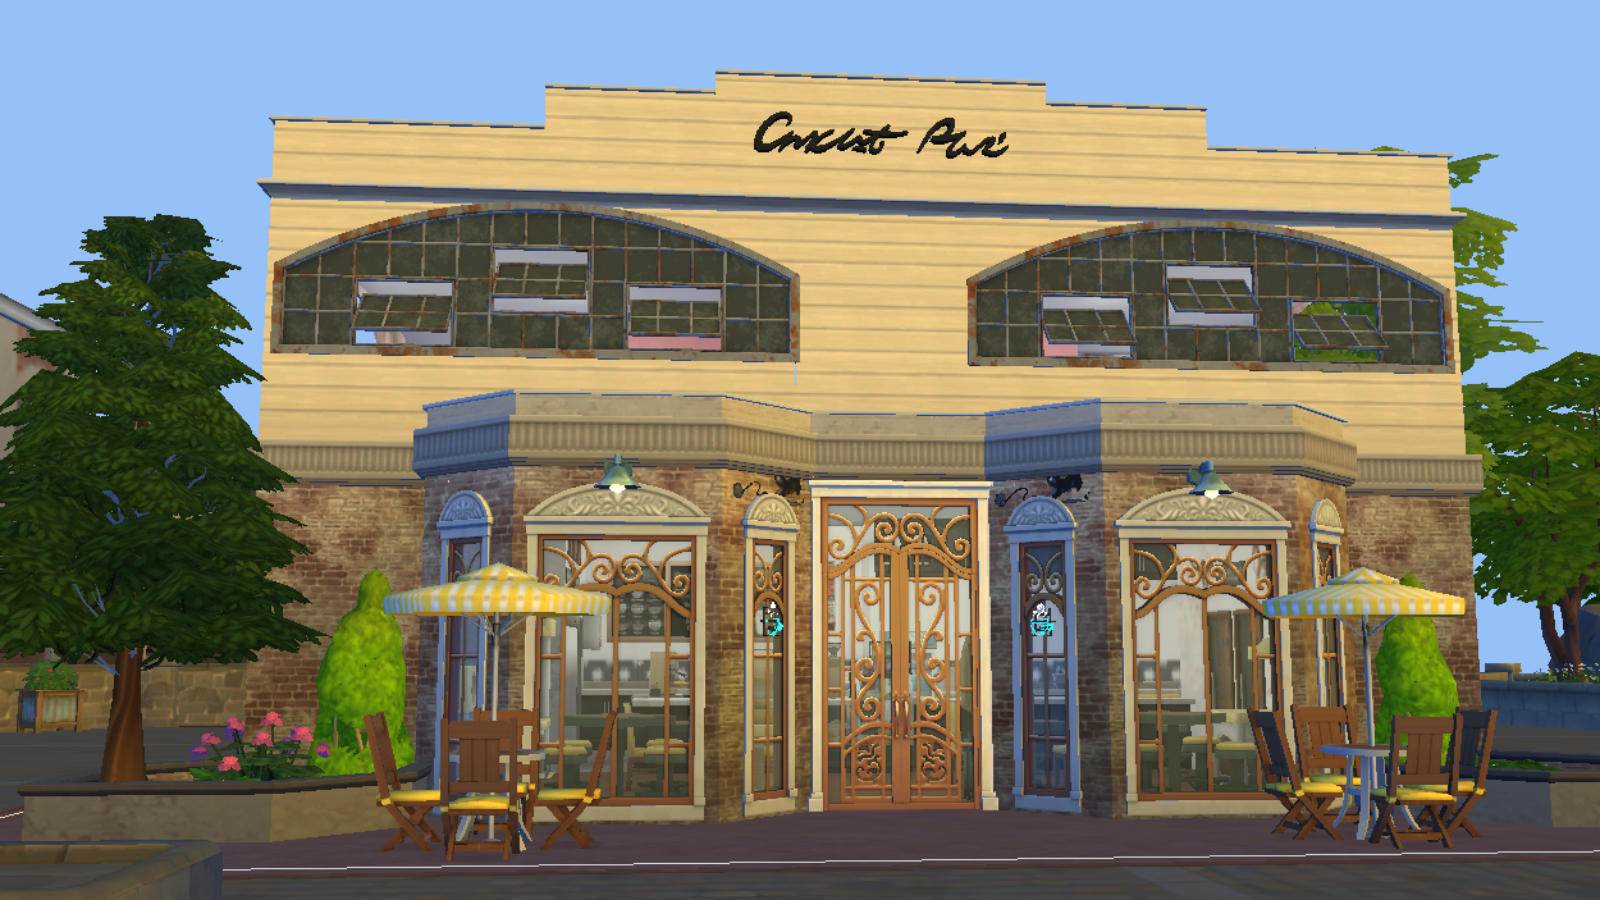 Exterior shot of the Cat Cafe